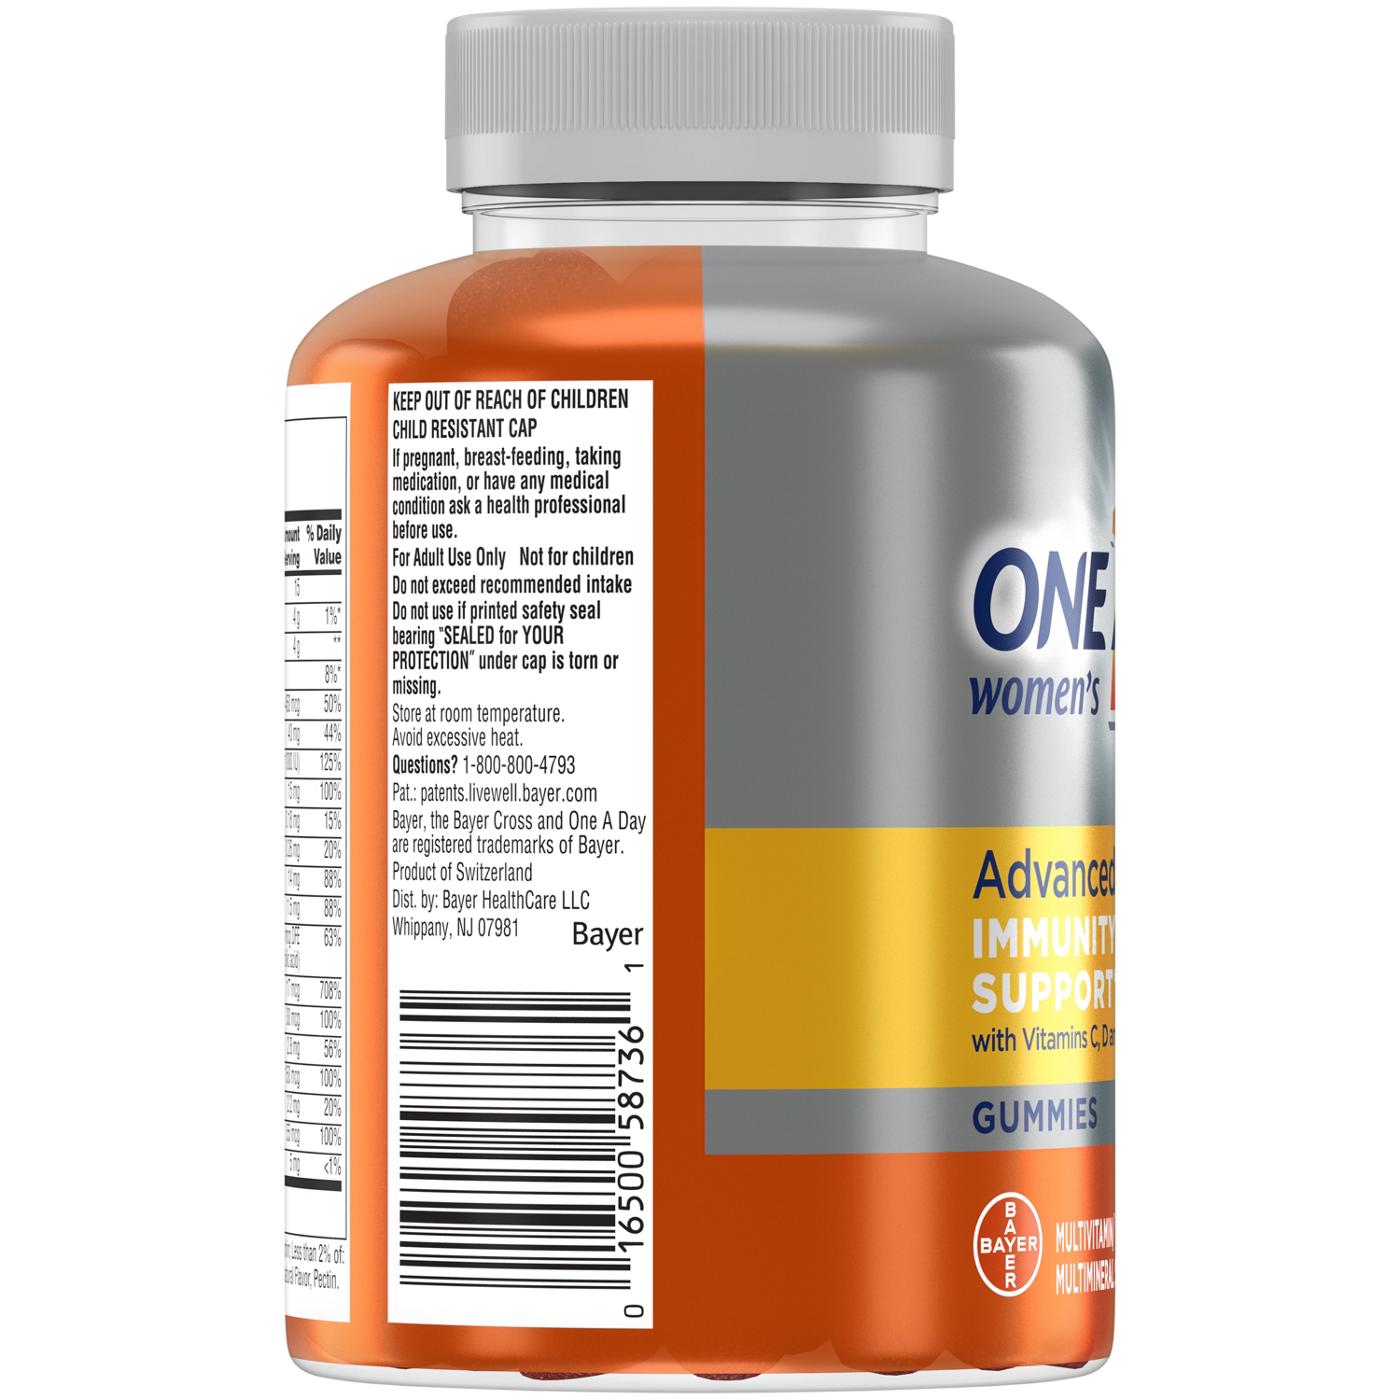 One A Day Women's 50+ Advanced Multivitamin Gummies; image 5 of 5